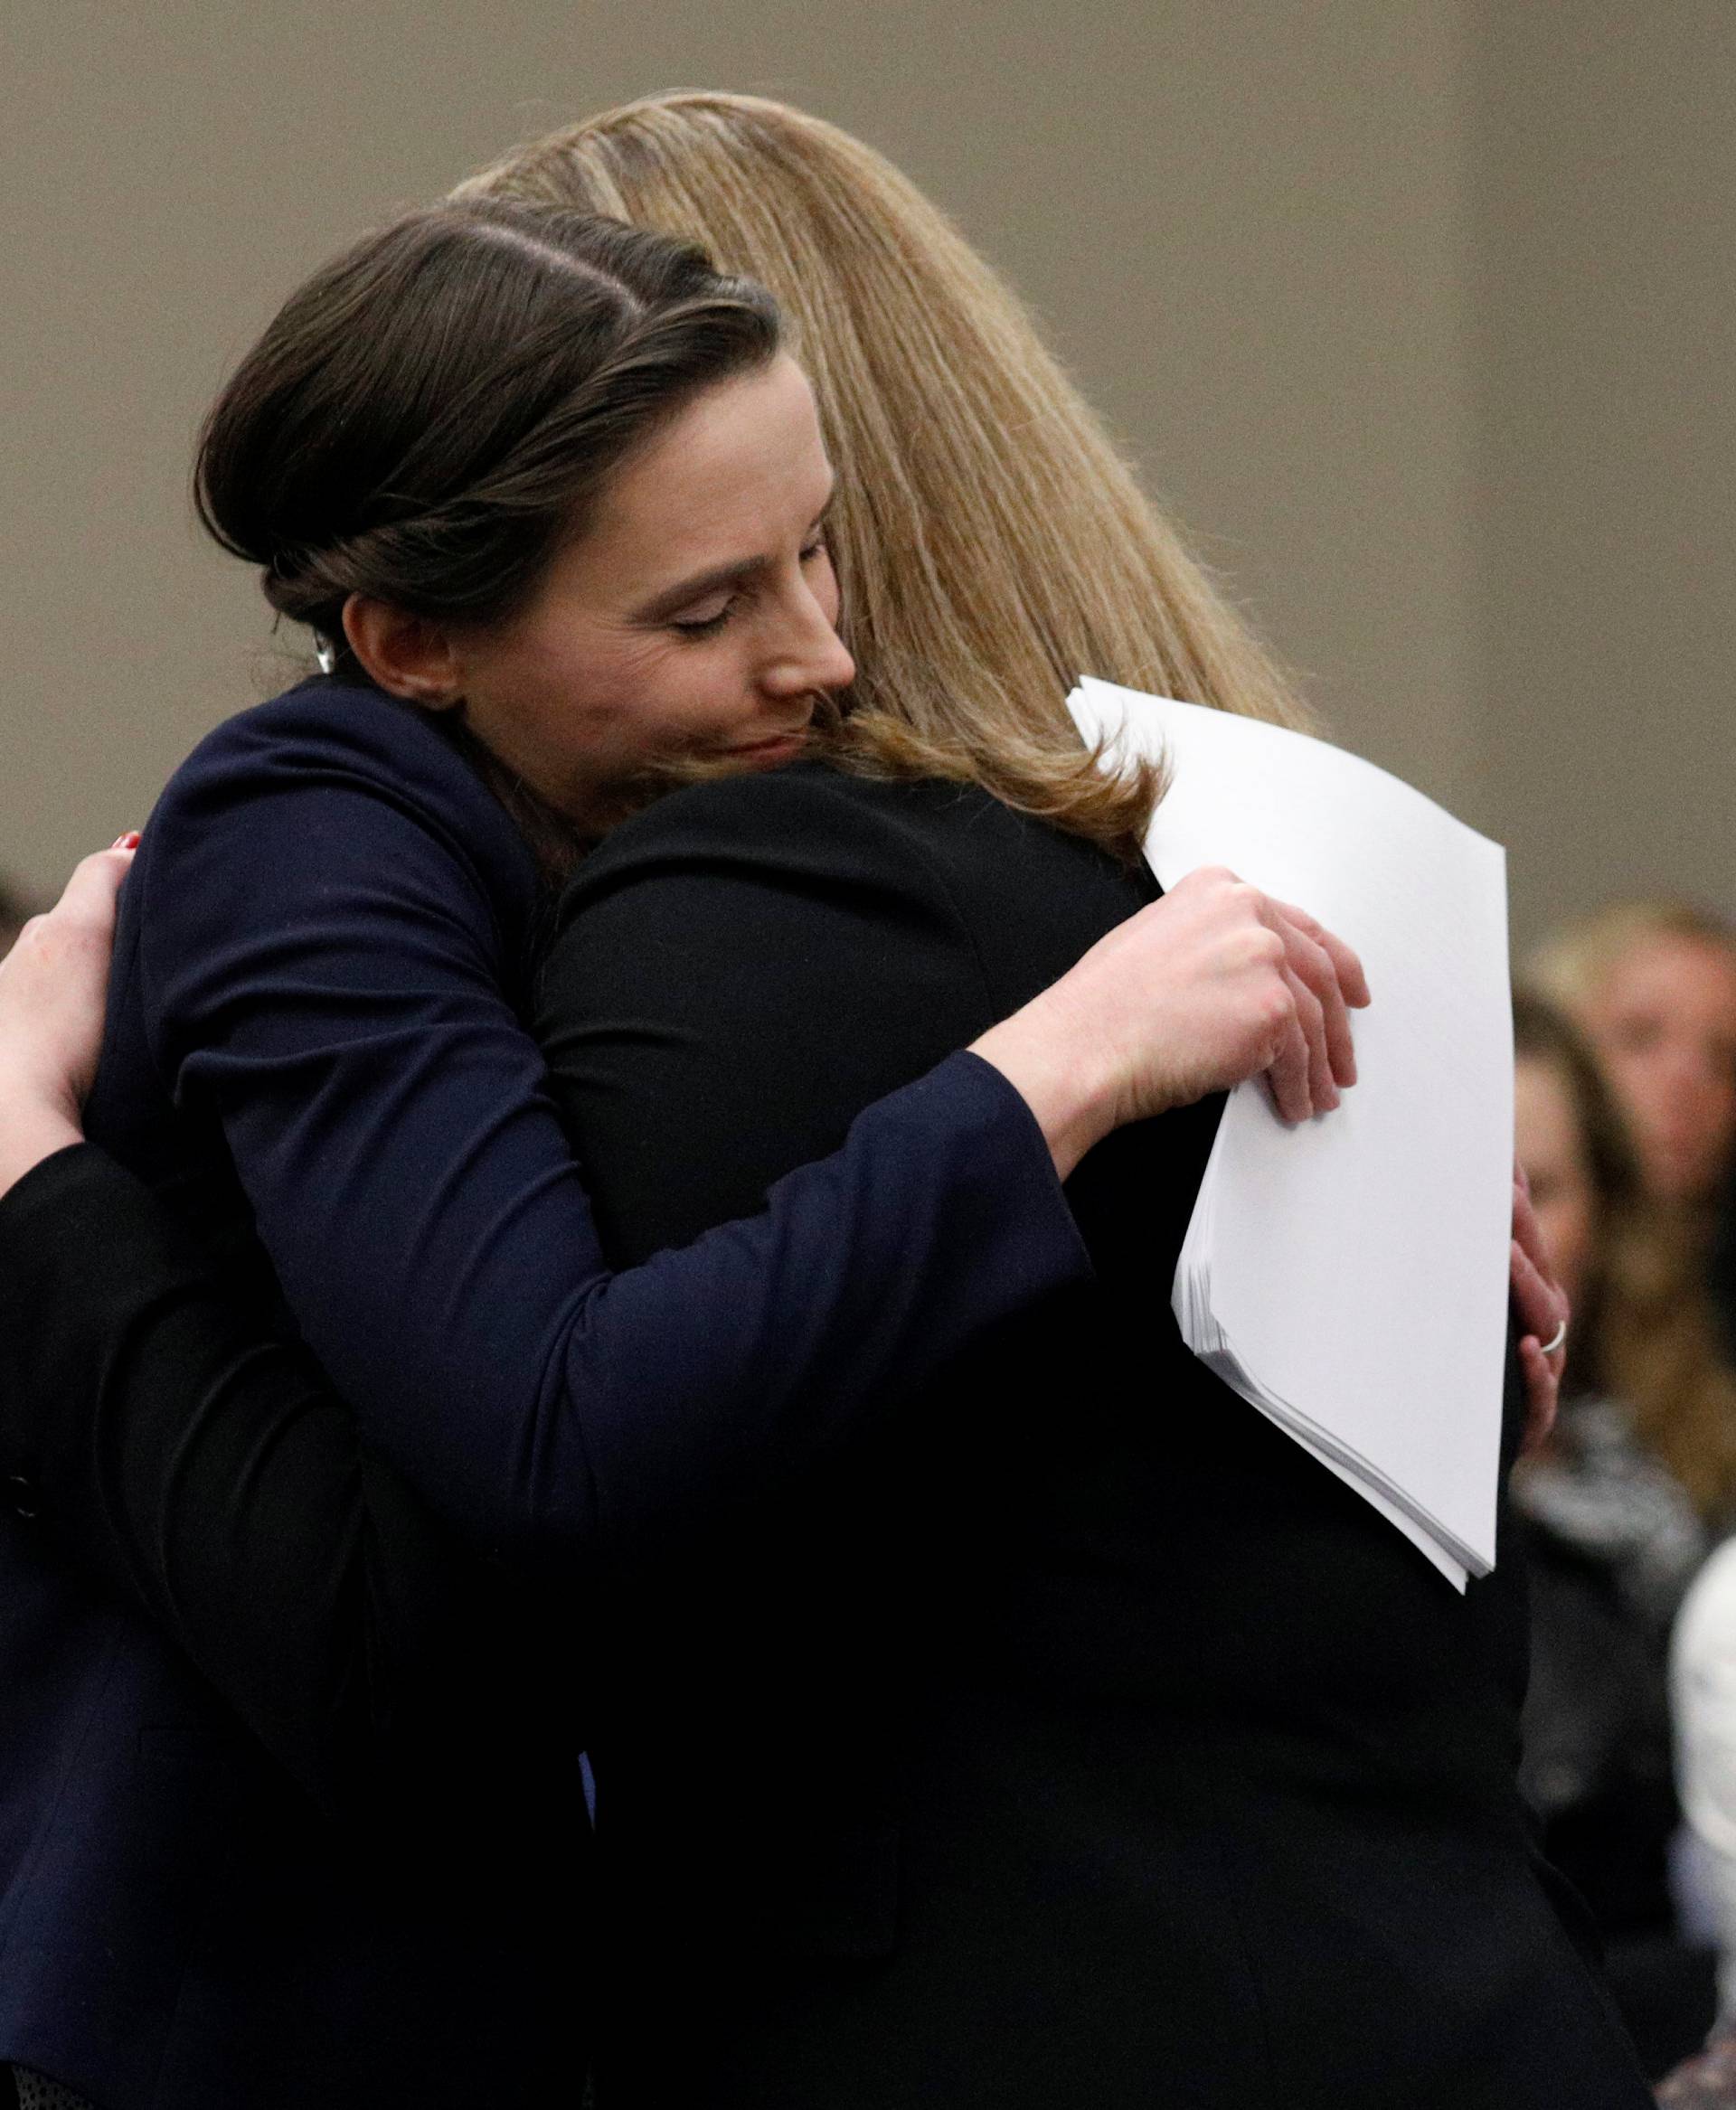 Victim Rachael Denhollander embraces prosecutor Angela Povilaitis at the sentencing hearing for Larry Nassar, a former team USA Gymnastics doctor who pleaded guilty in November 2017 to sexual assault charges, in Lansing